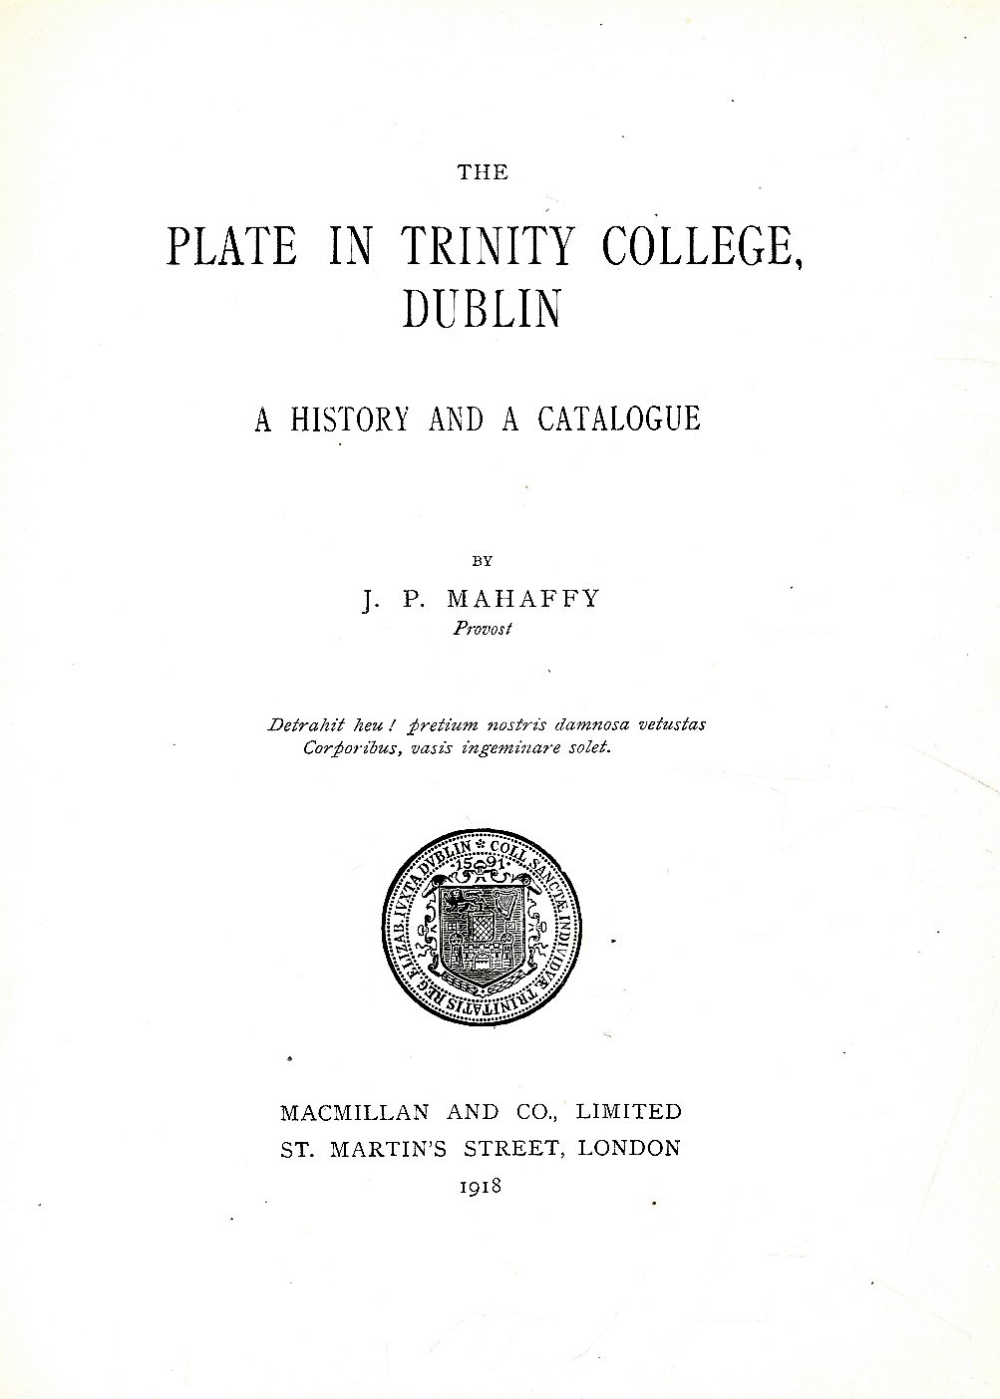 Mahaffy (J.P.) The Plate in Trinity College, Dublin. A History and A Catalogue, 4to L. - Image 2 of 3